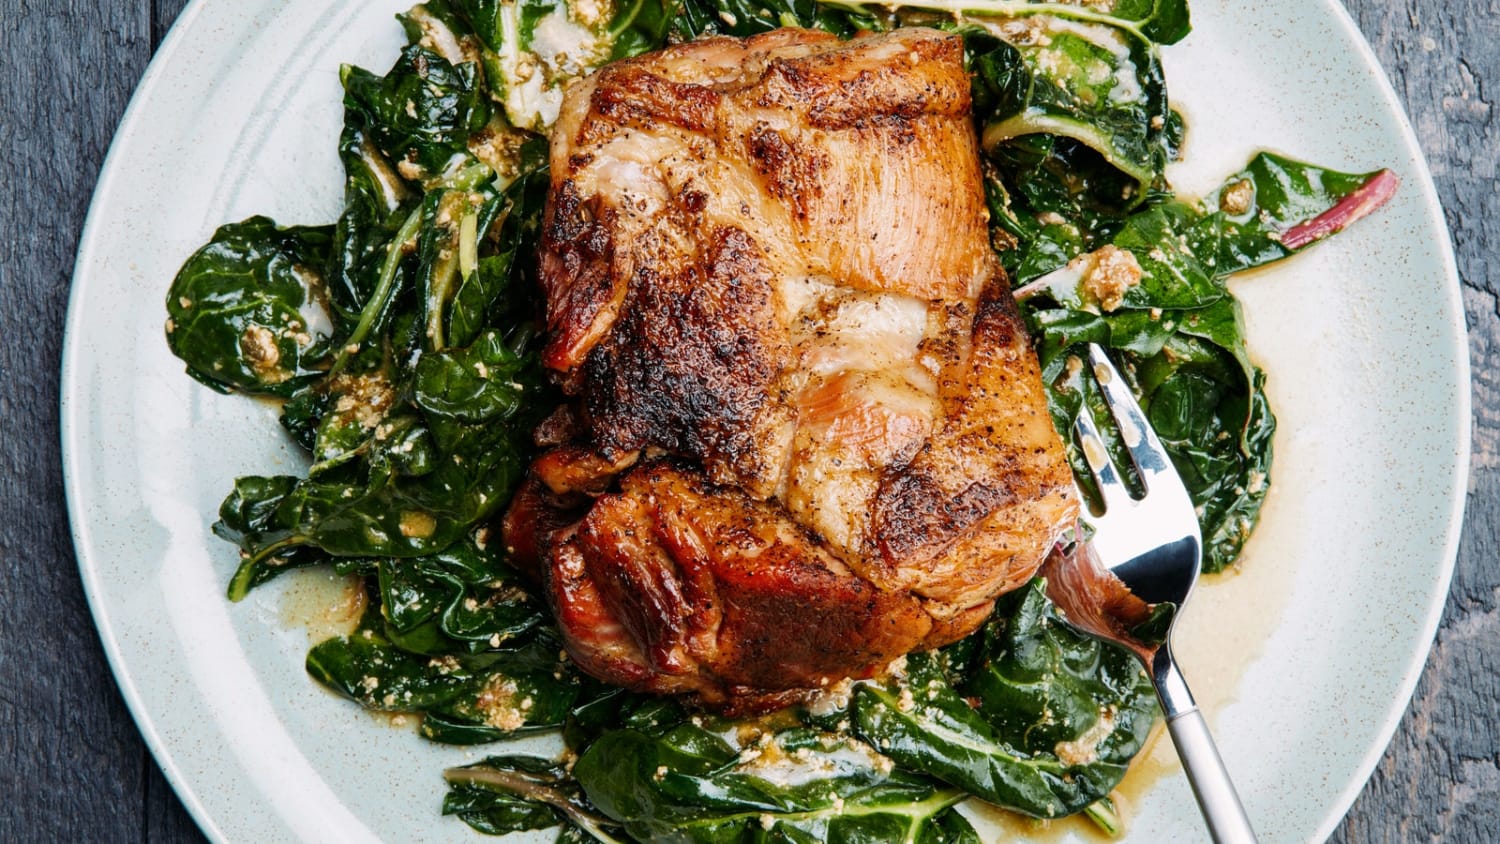 17 Easy Braises (and Slow-Cooker Recipes) That Don't Feel Too Wintery for Spring